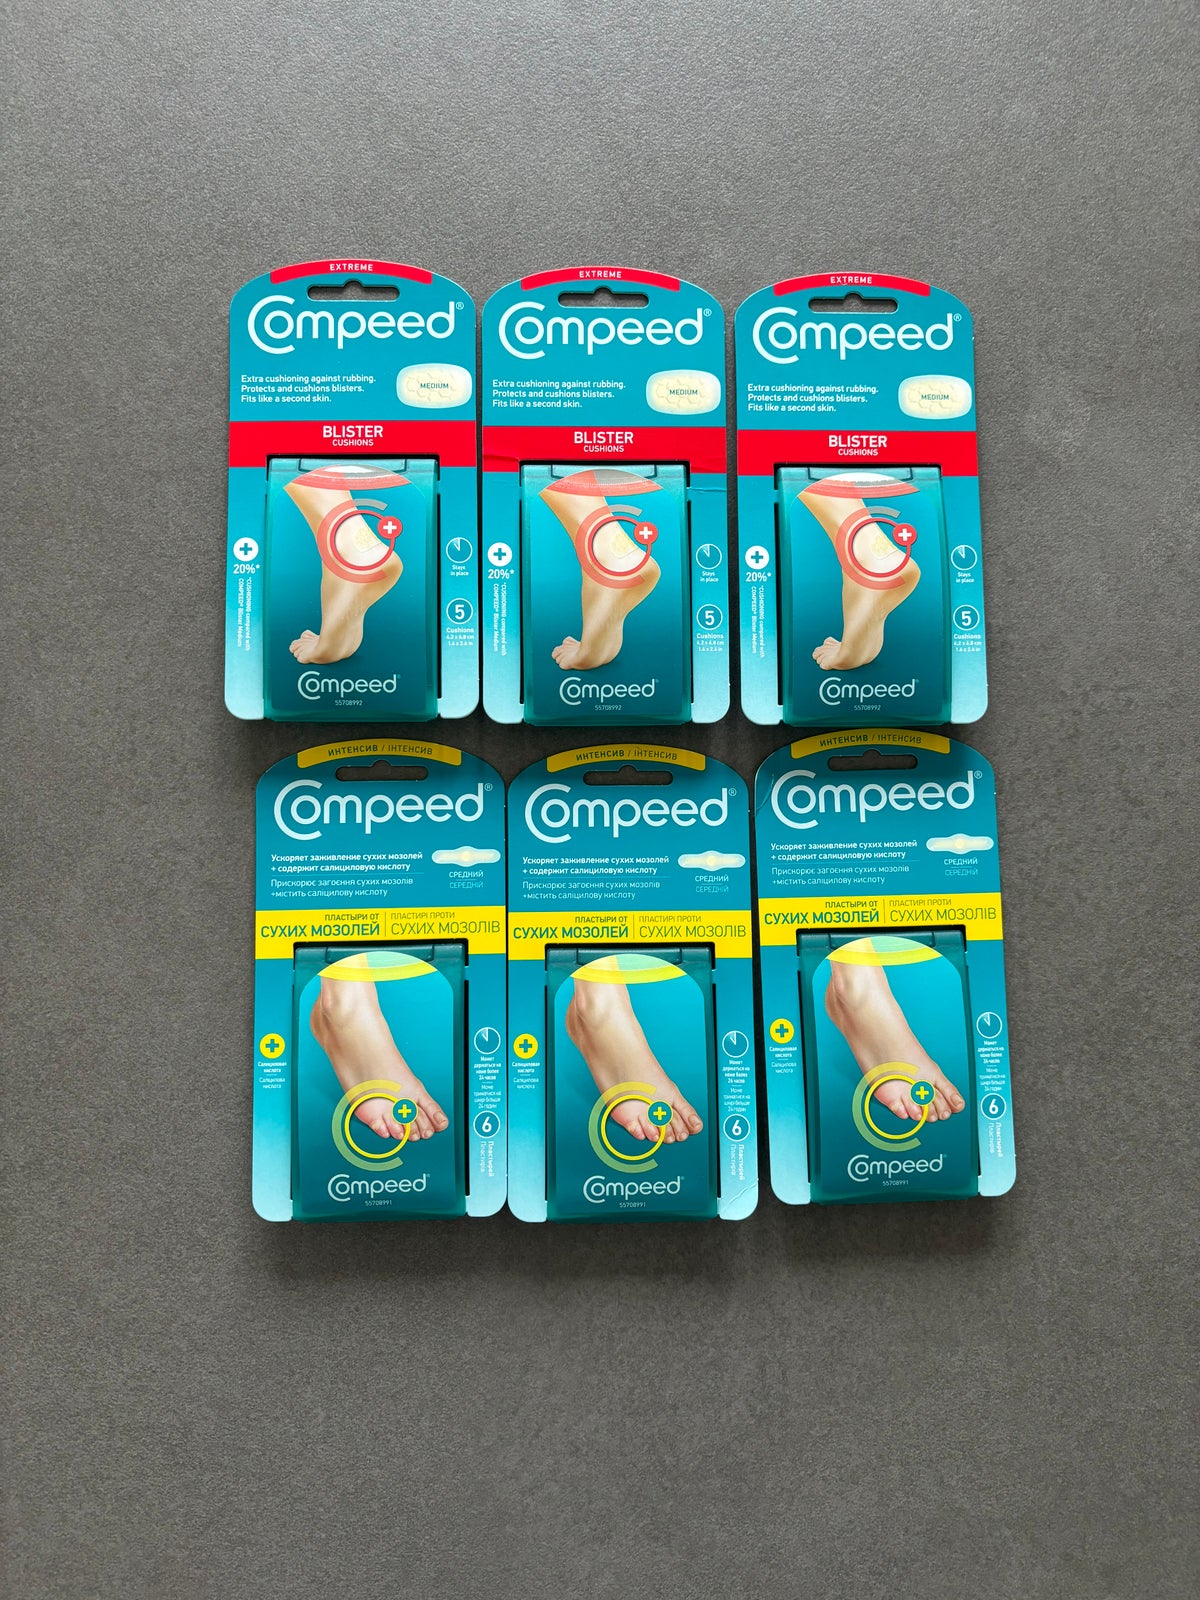 Andet, Plaster , Compeed